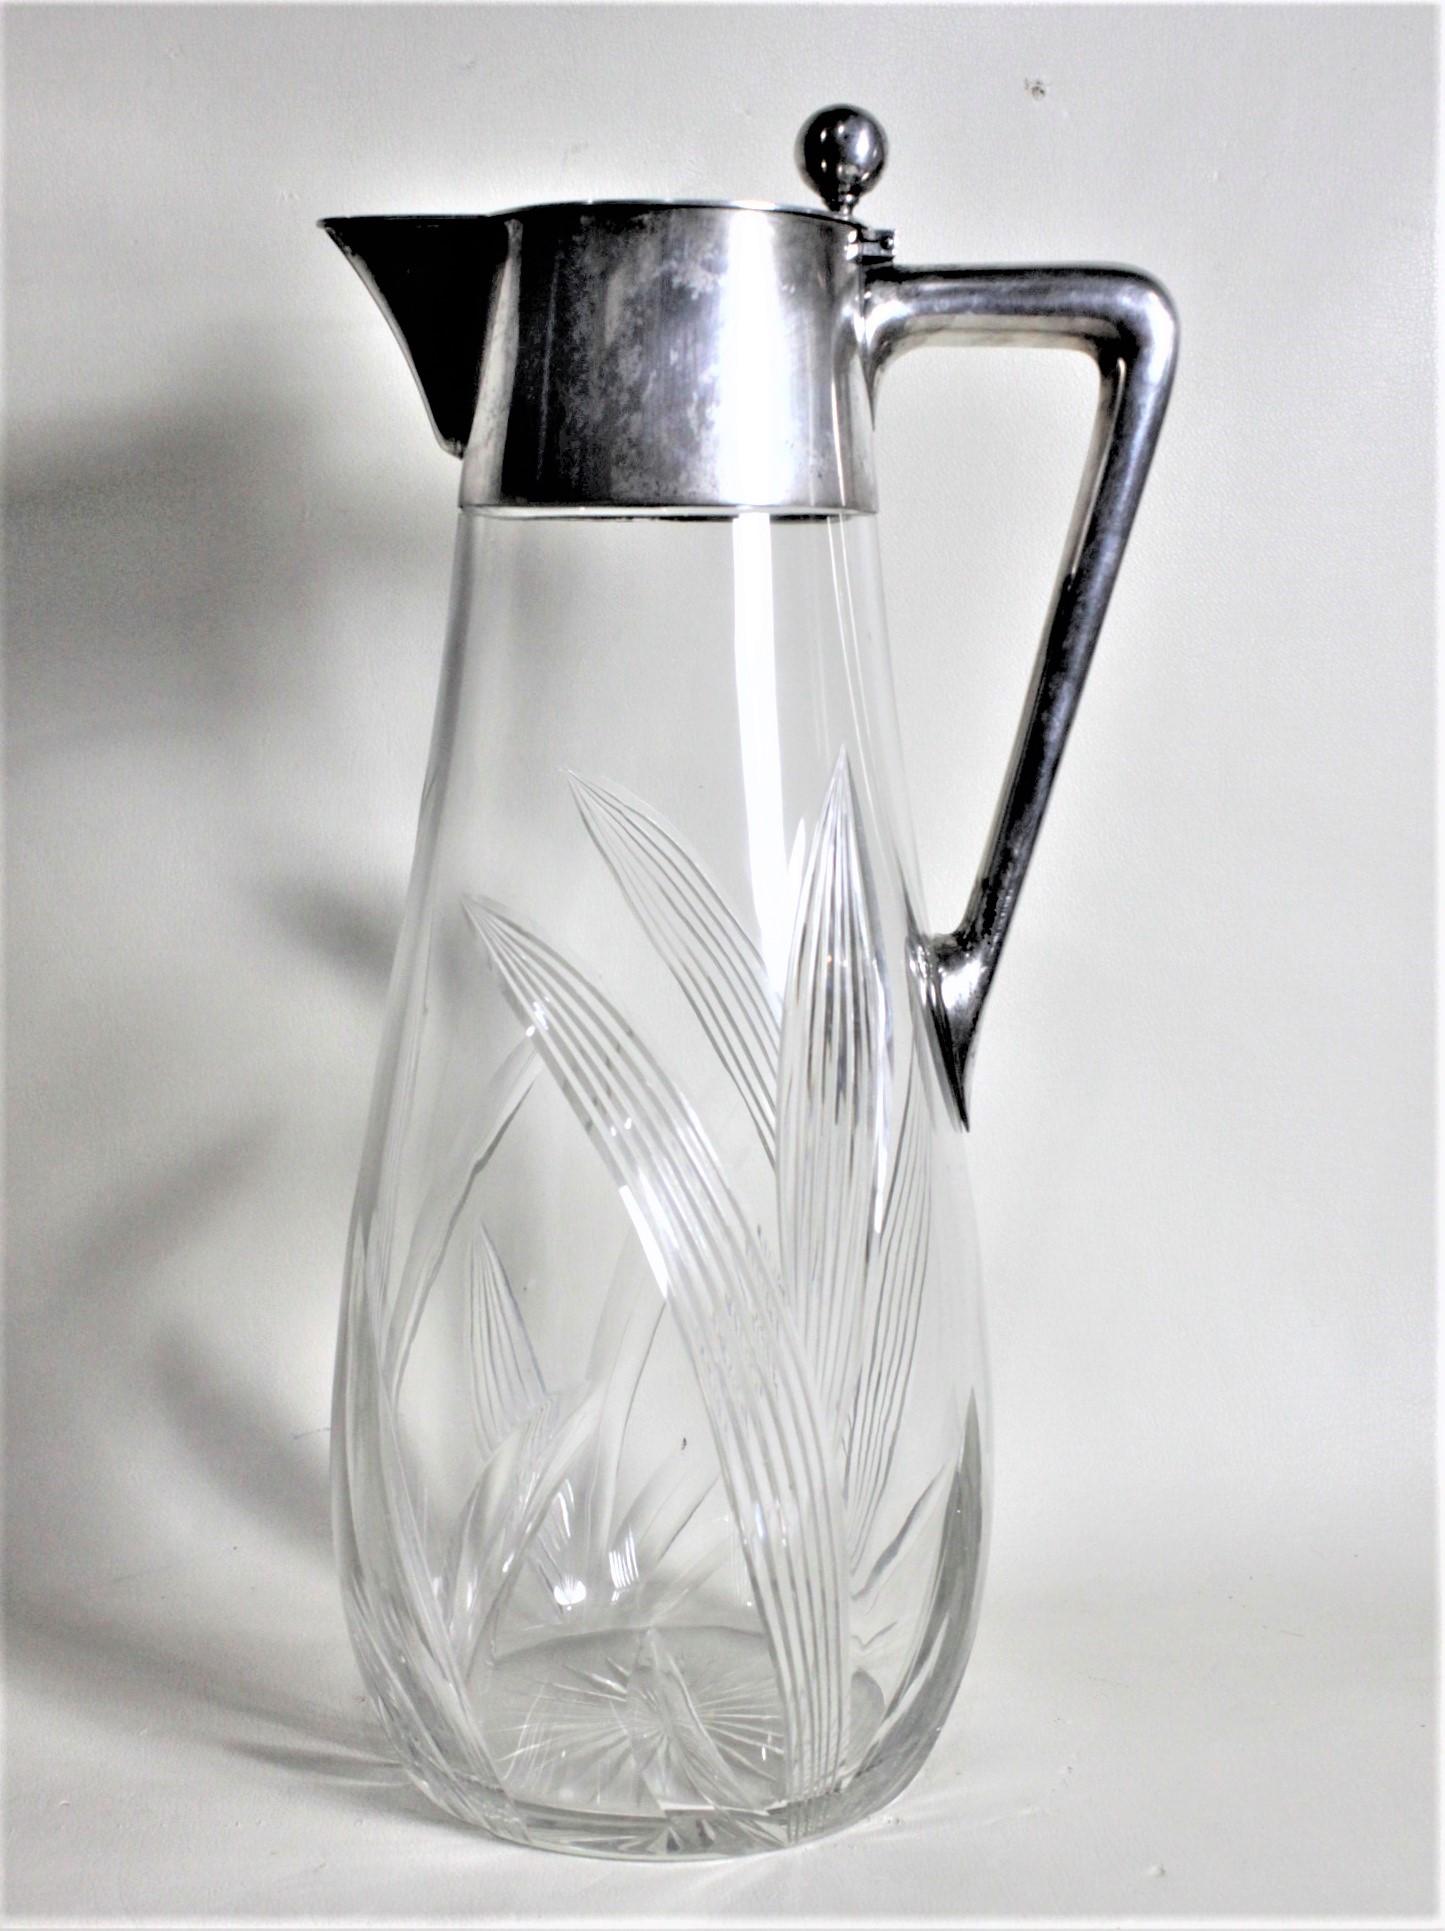 This antique German cut crystal and .800 silver lidded pitcher was made by a Julius Merz in circa 1900 in the period Edwardian style. The collar and handle of the pitcher are made of silver and the lid has a very detailed ball top to open the lid.